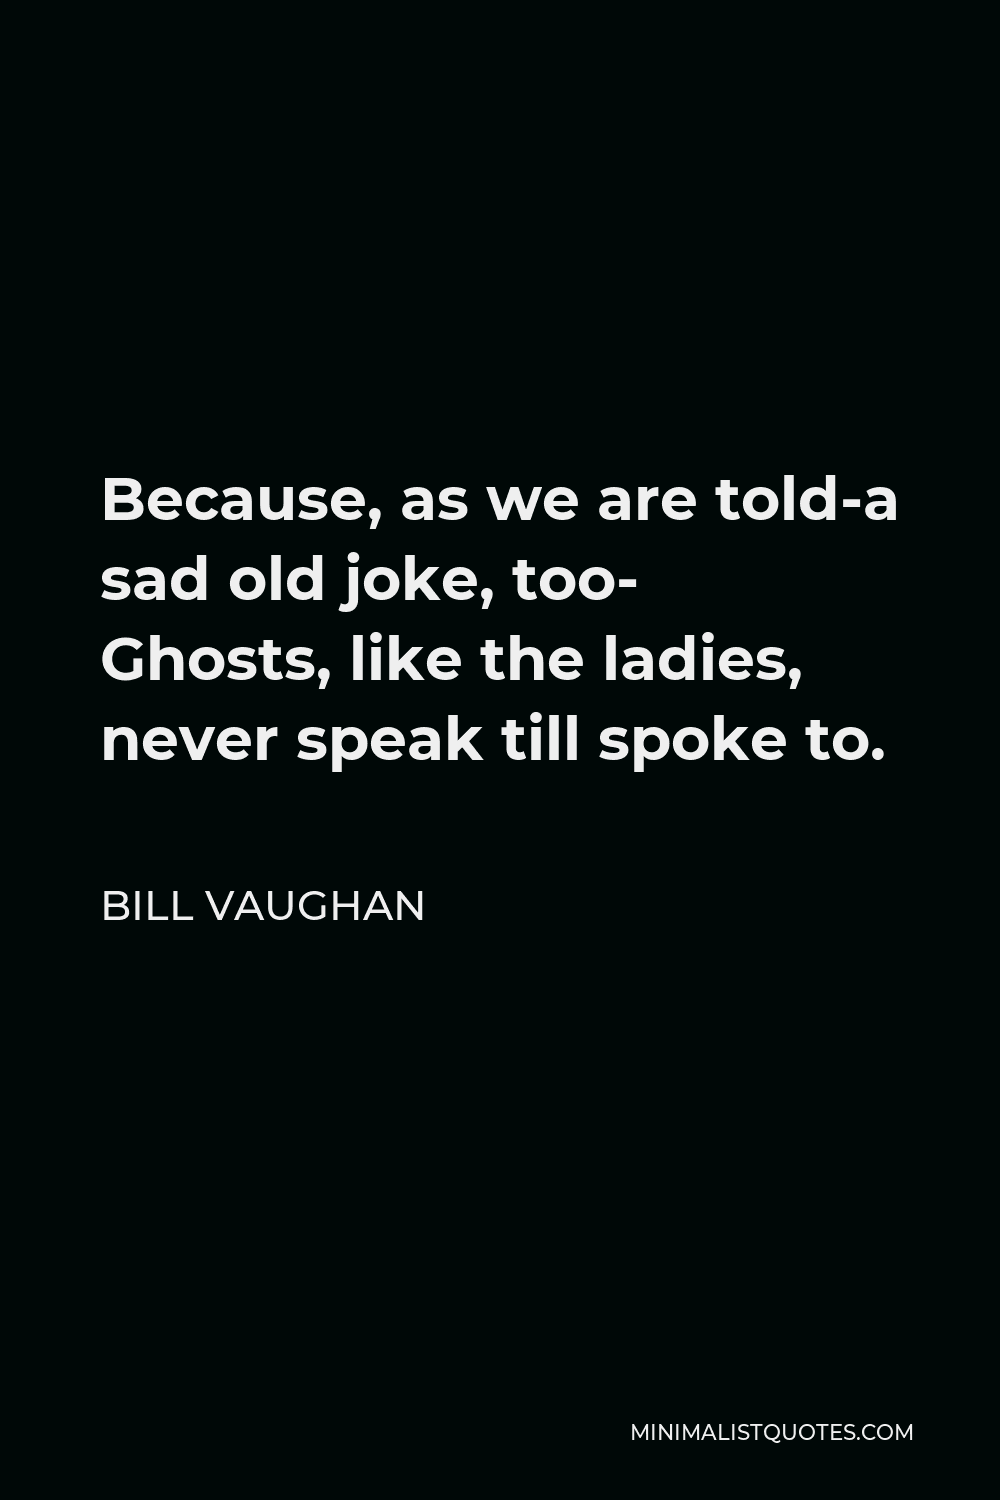 Bill Vaughan Quote - Because, as we are told-a sad old joke, too- Ghosts, like the ladies, never speak till spoke to.